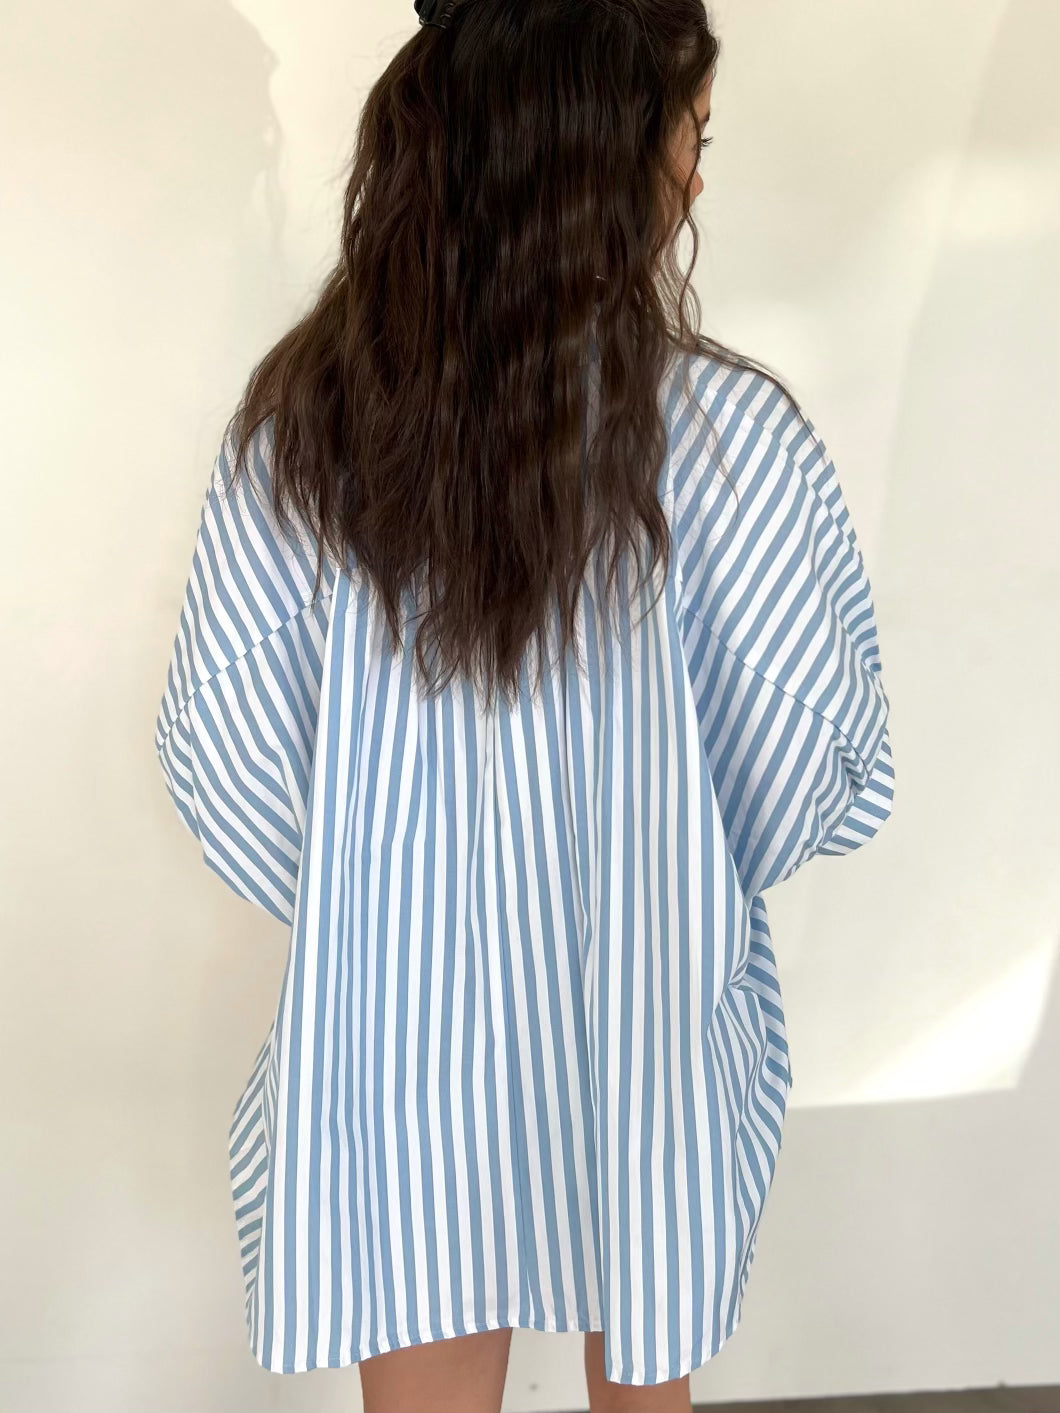 Oversized Striped Button Down Shirt